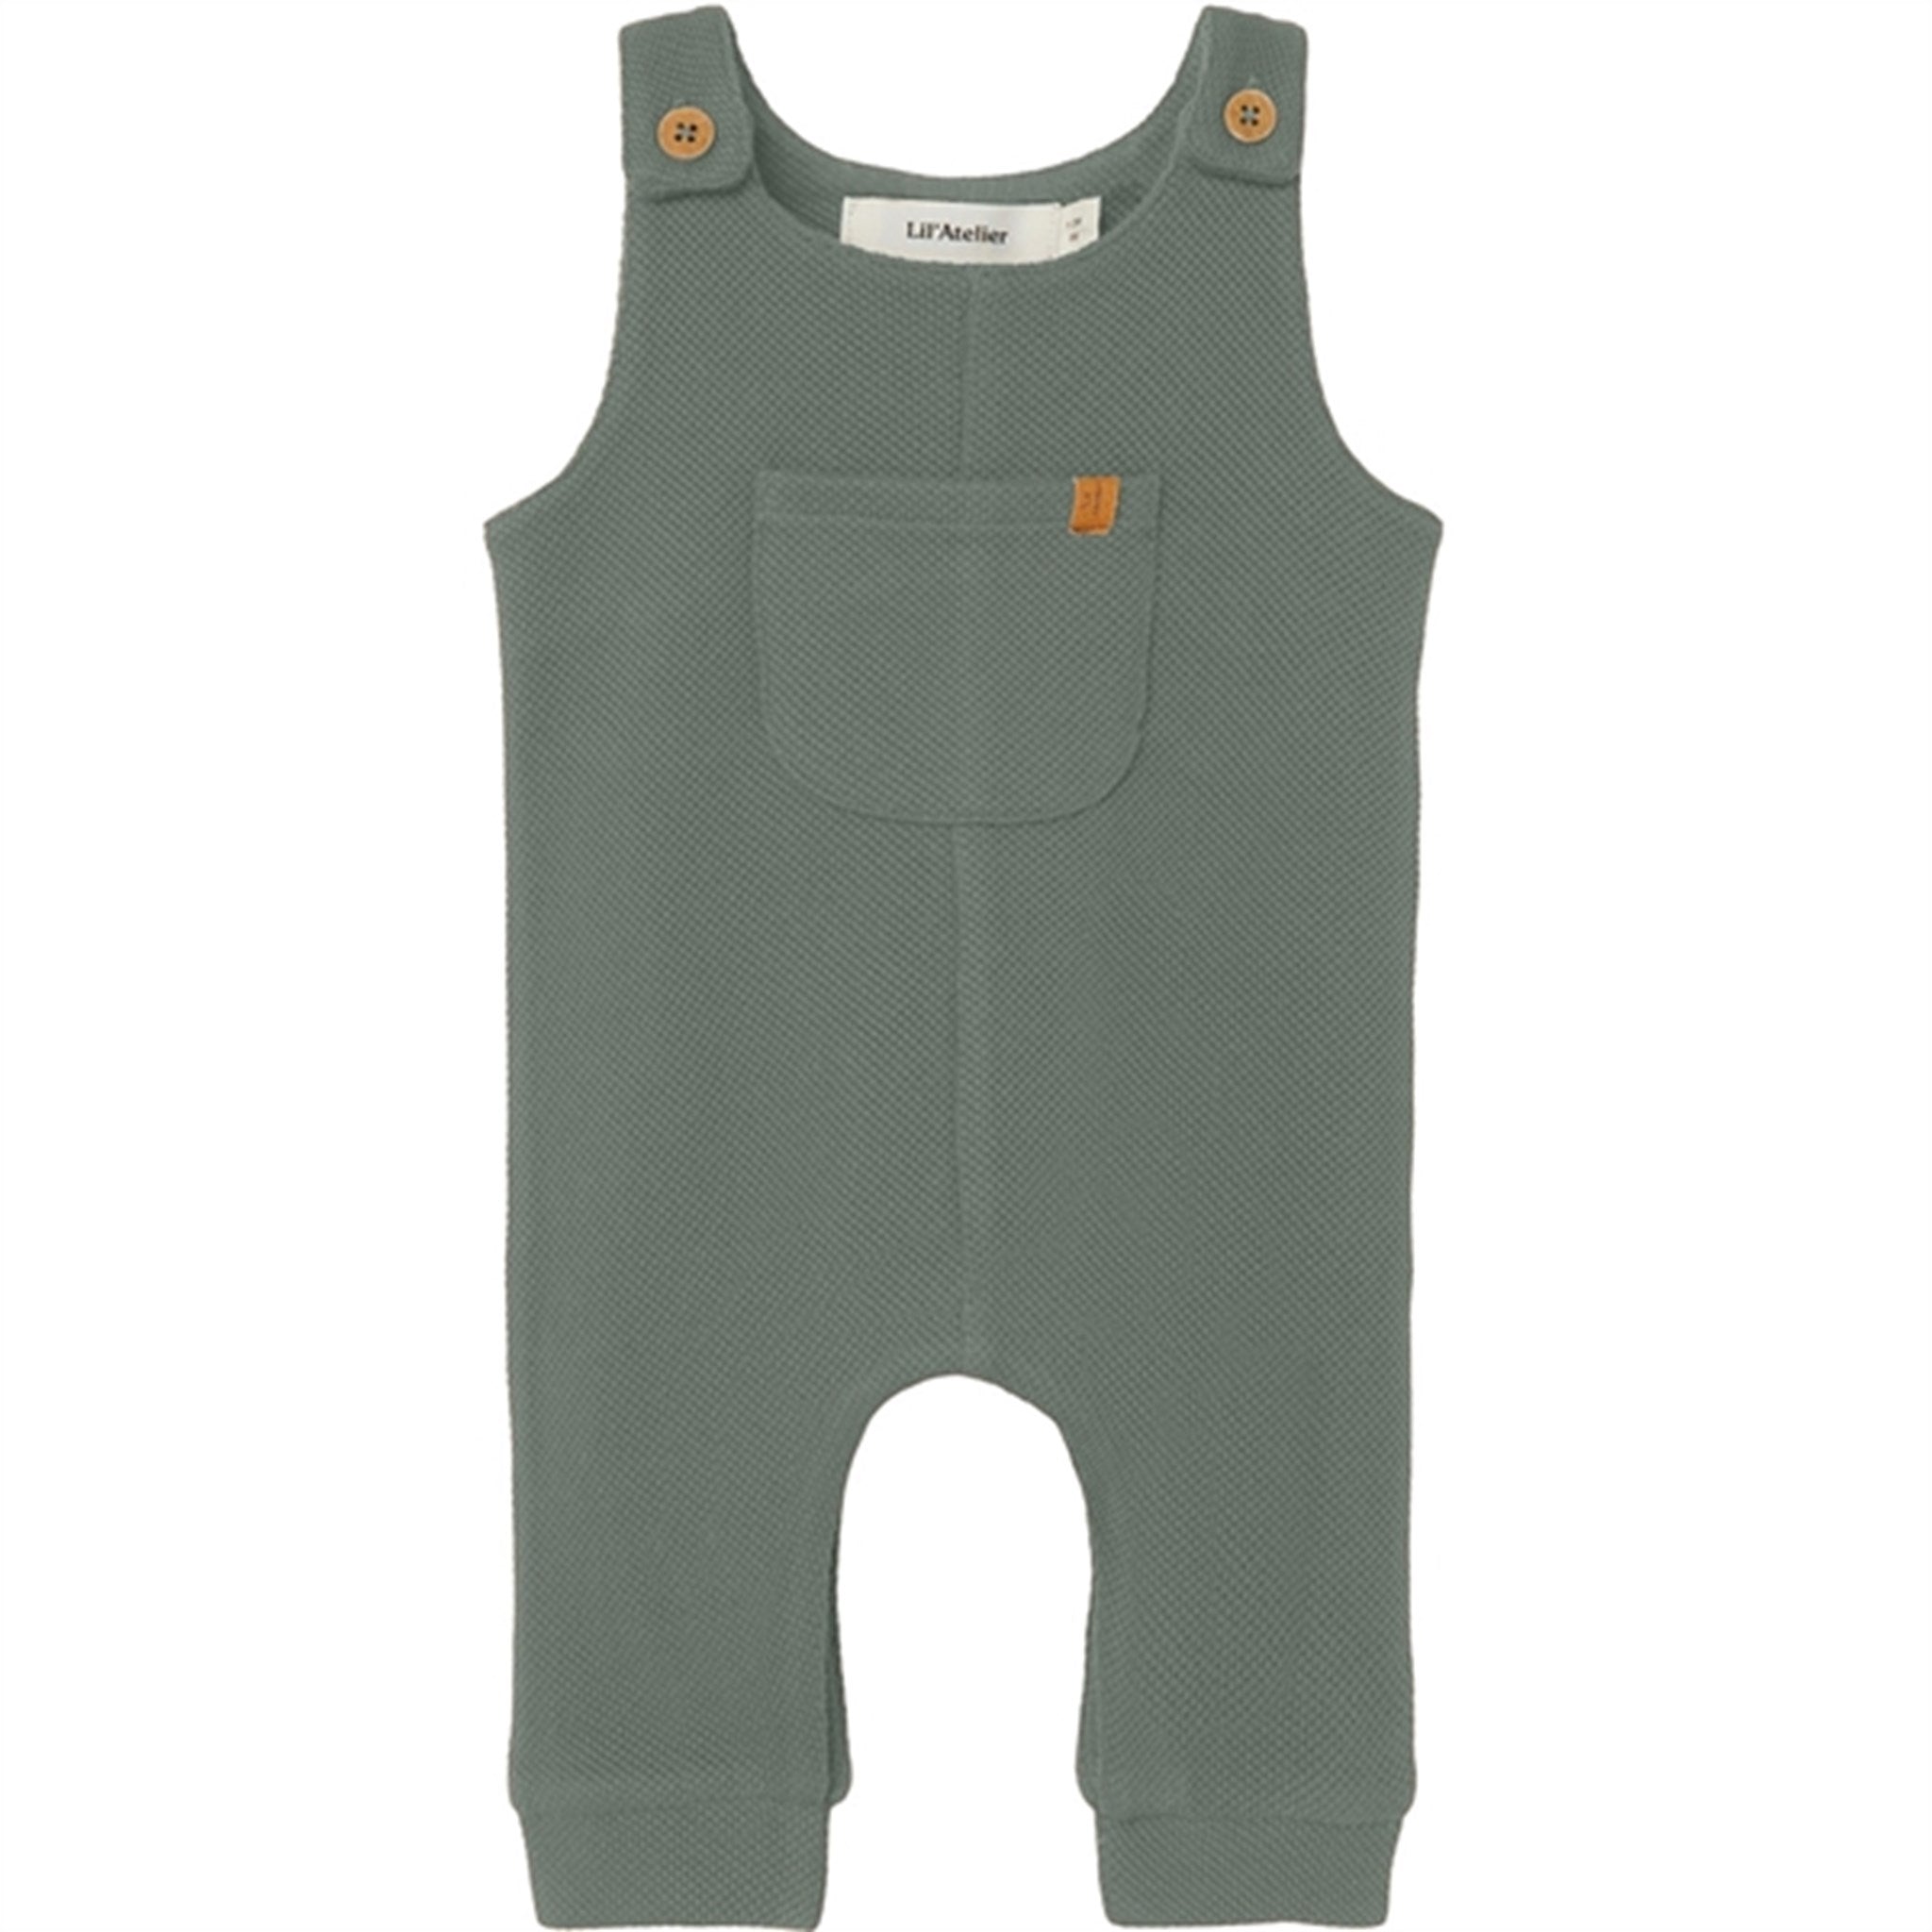 Lil'Atelier Agave Green Talio Sweat Overall